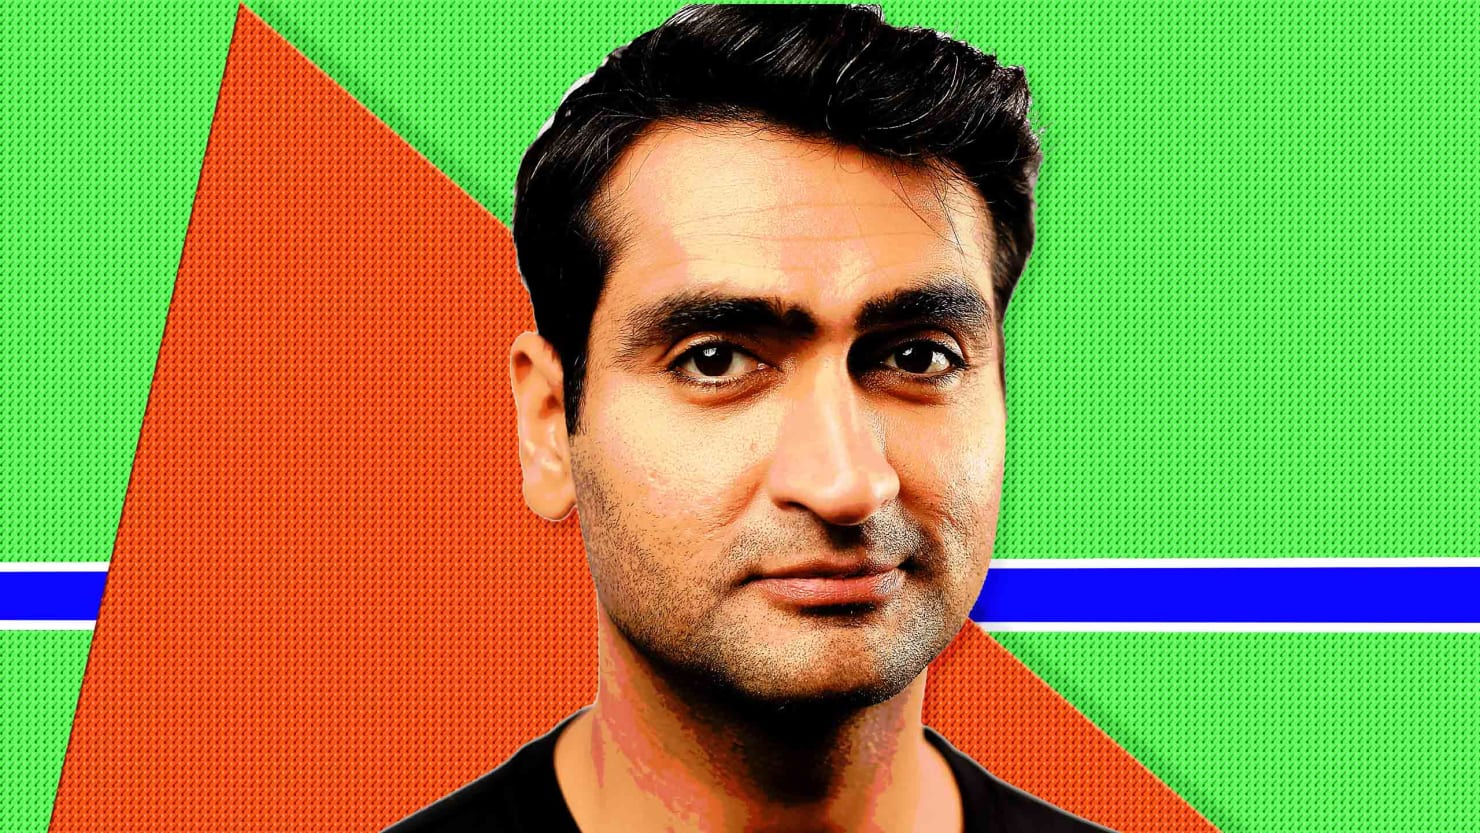 Kumail Nanjiani on the Art of Crafting a Masterful 9/11 Joke and That Time He Was Accosted by Trump Supporters pic